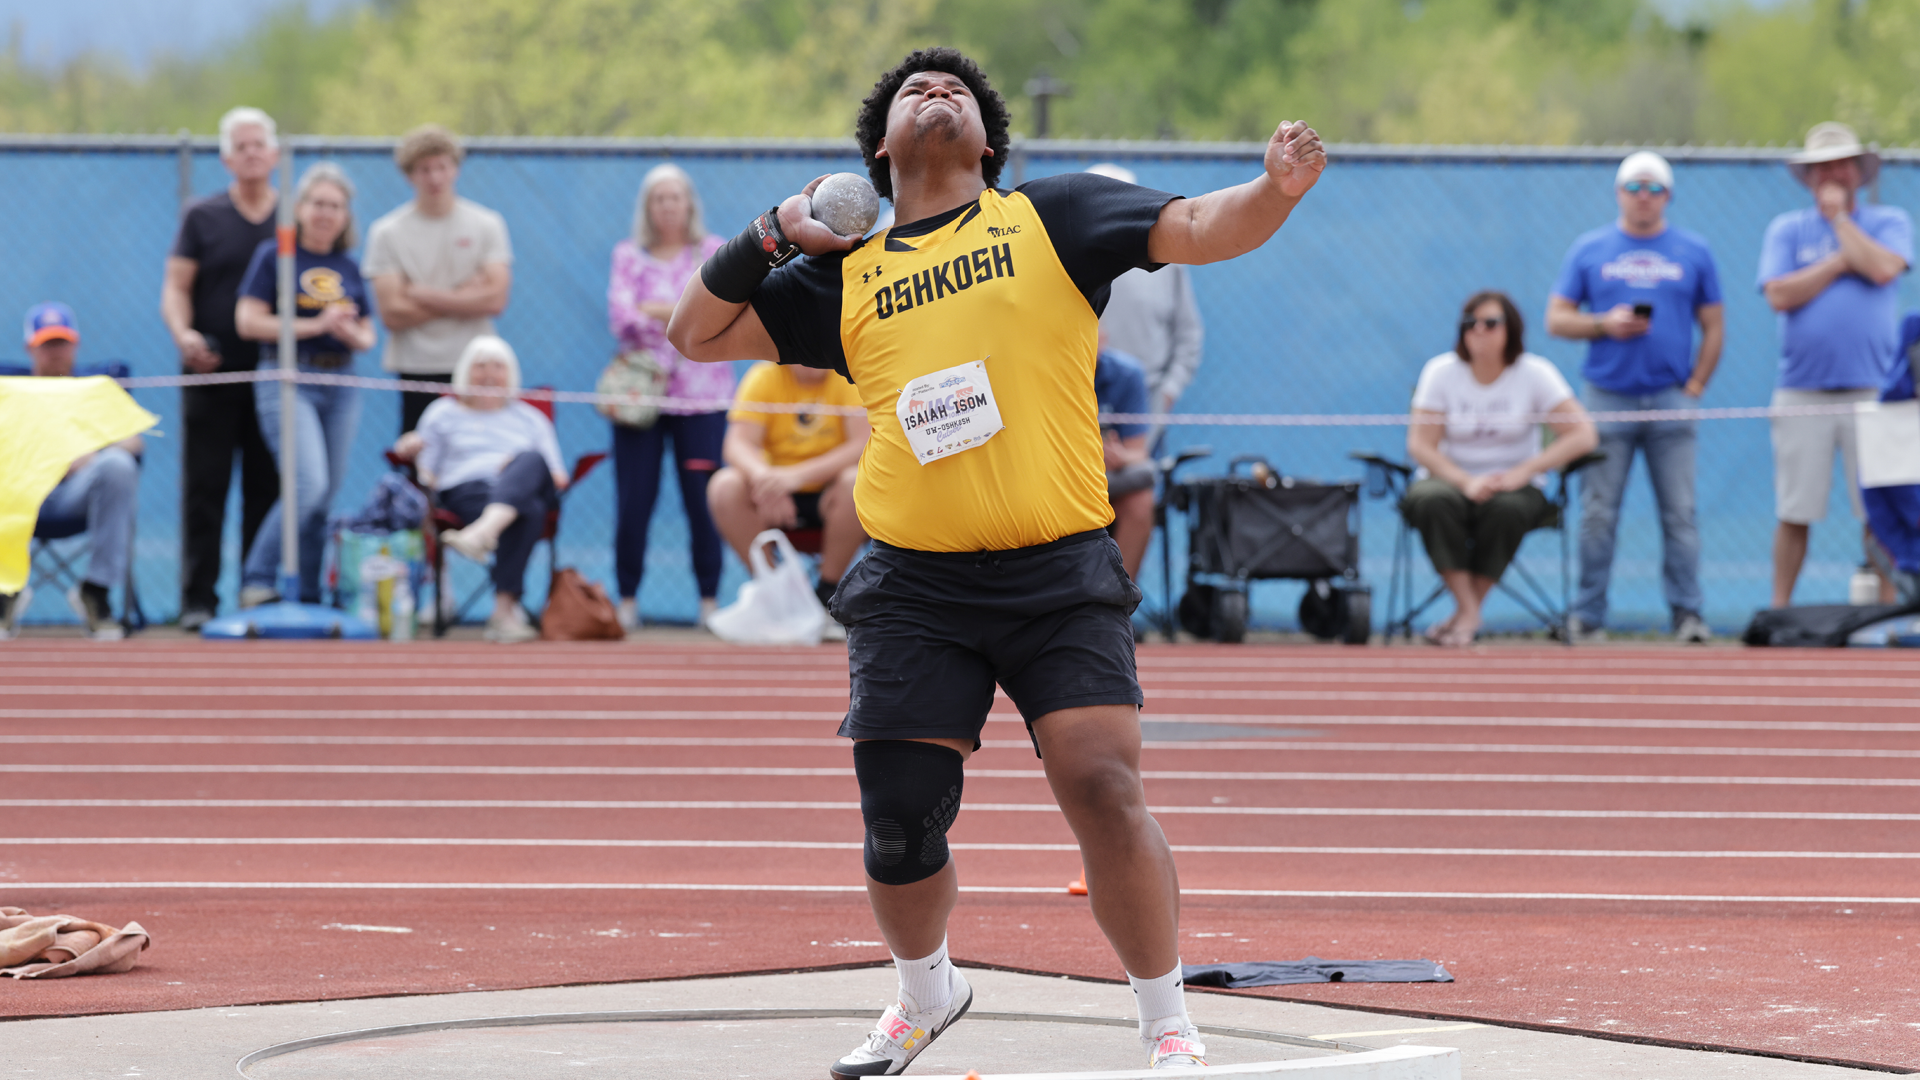 Isaiah Isom won the shot put title for the Titans at the WIAC Championship on Saturday. Photo Credit: Steve Frommell, UW-Oshkosh Sports Information